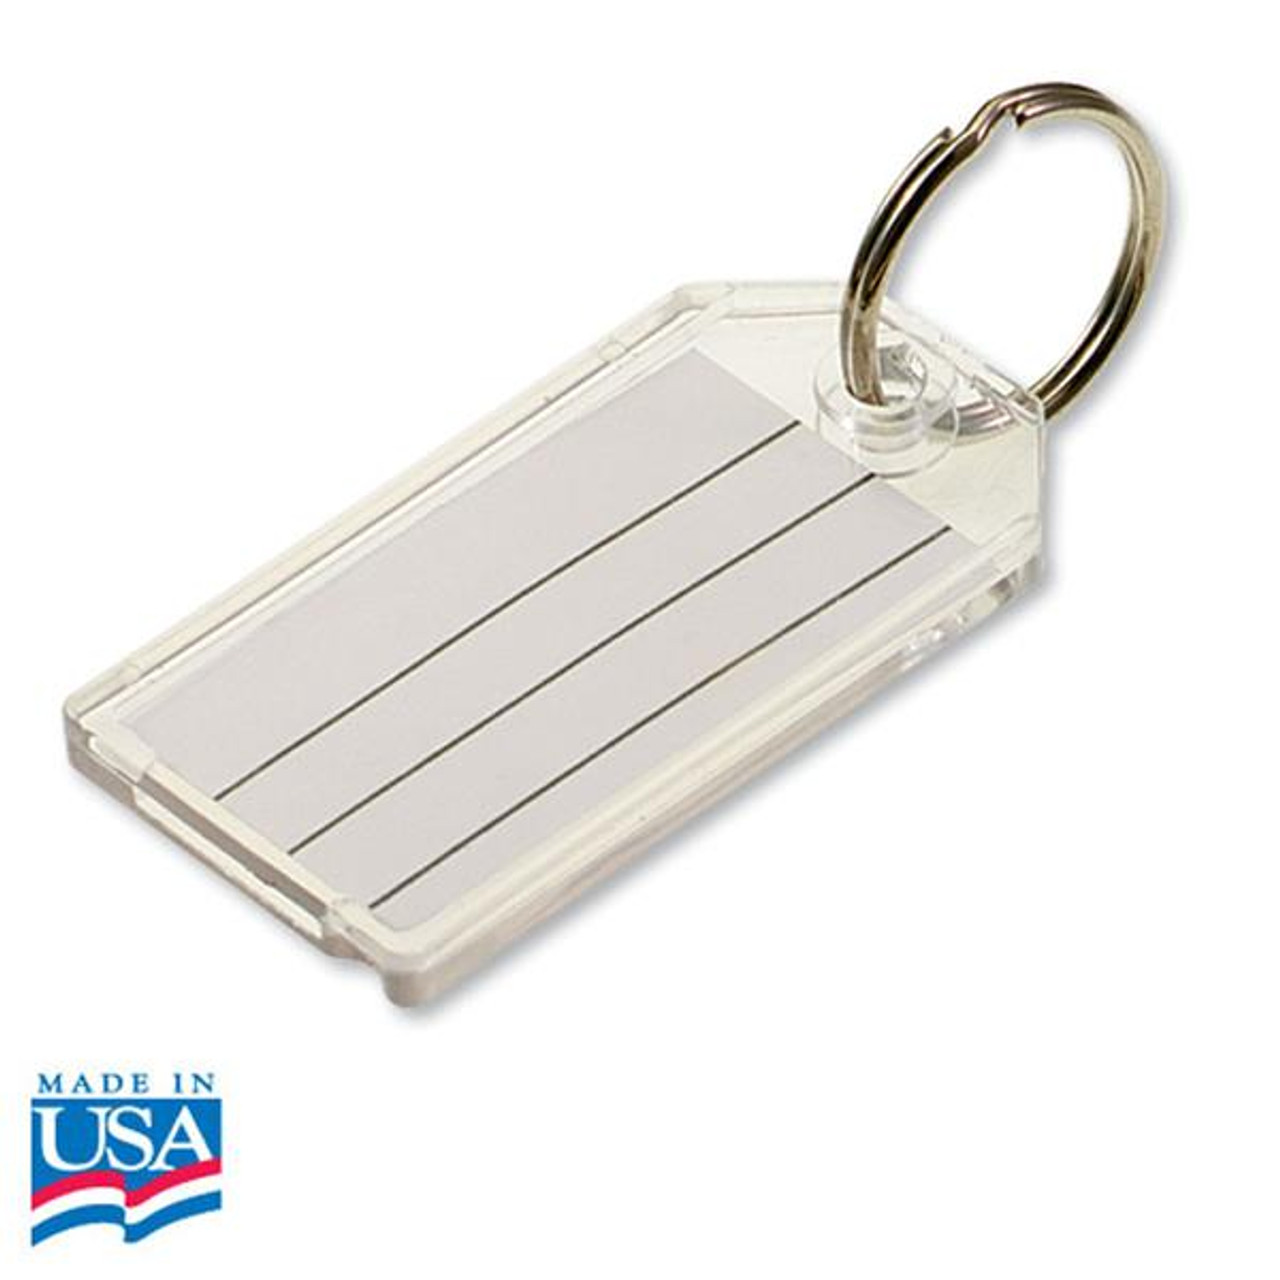 Extra Strength Large Key Tag with Split Ring